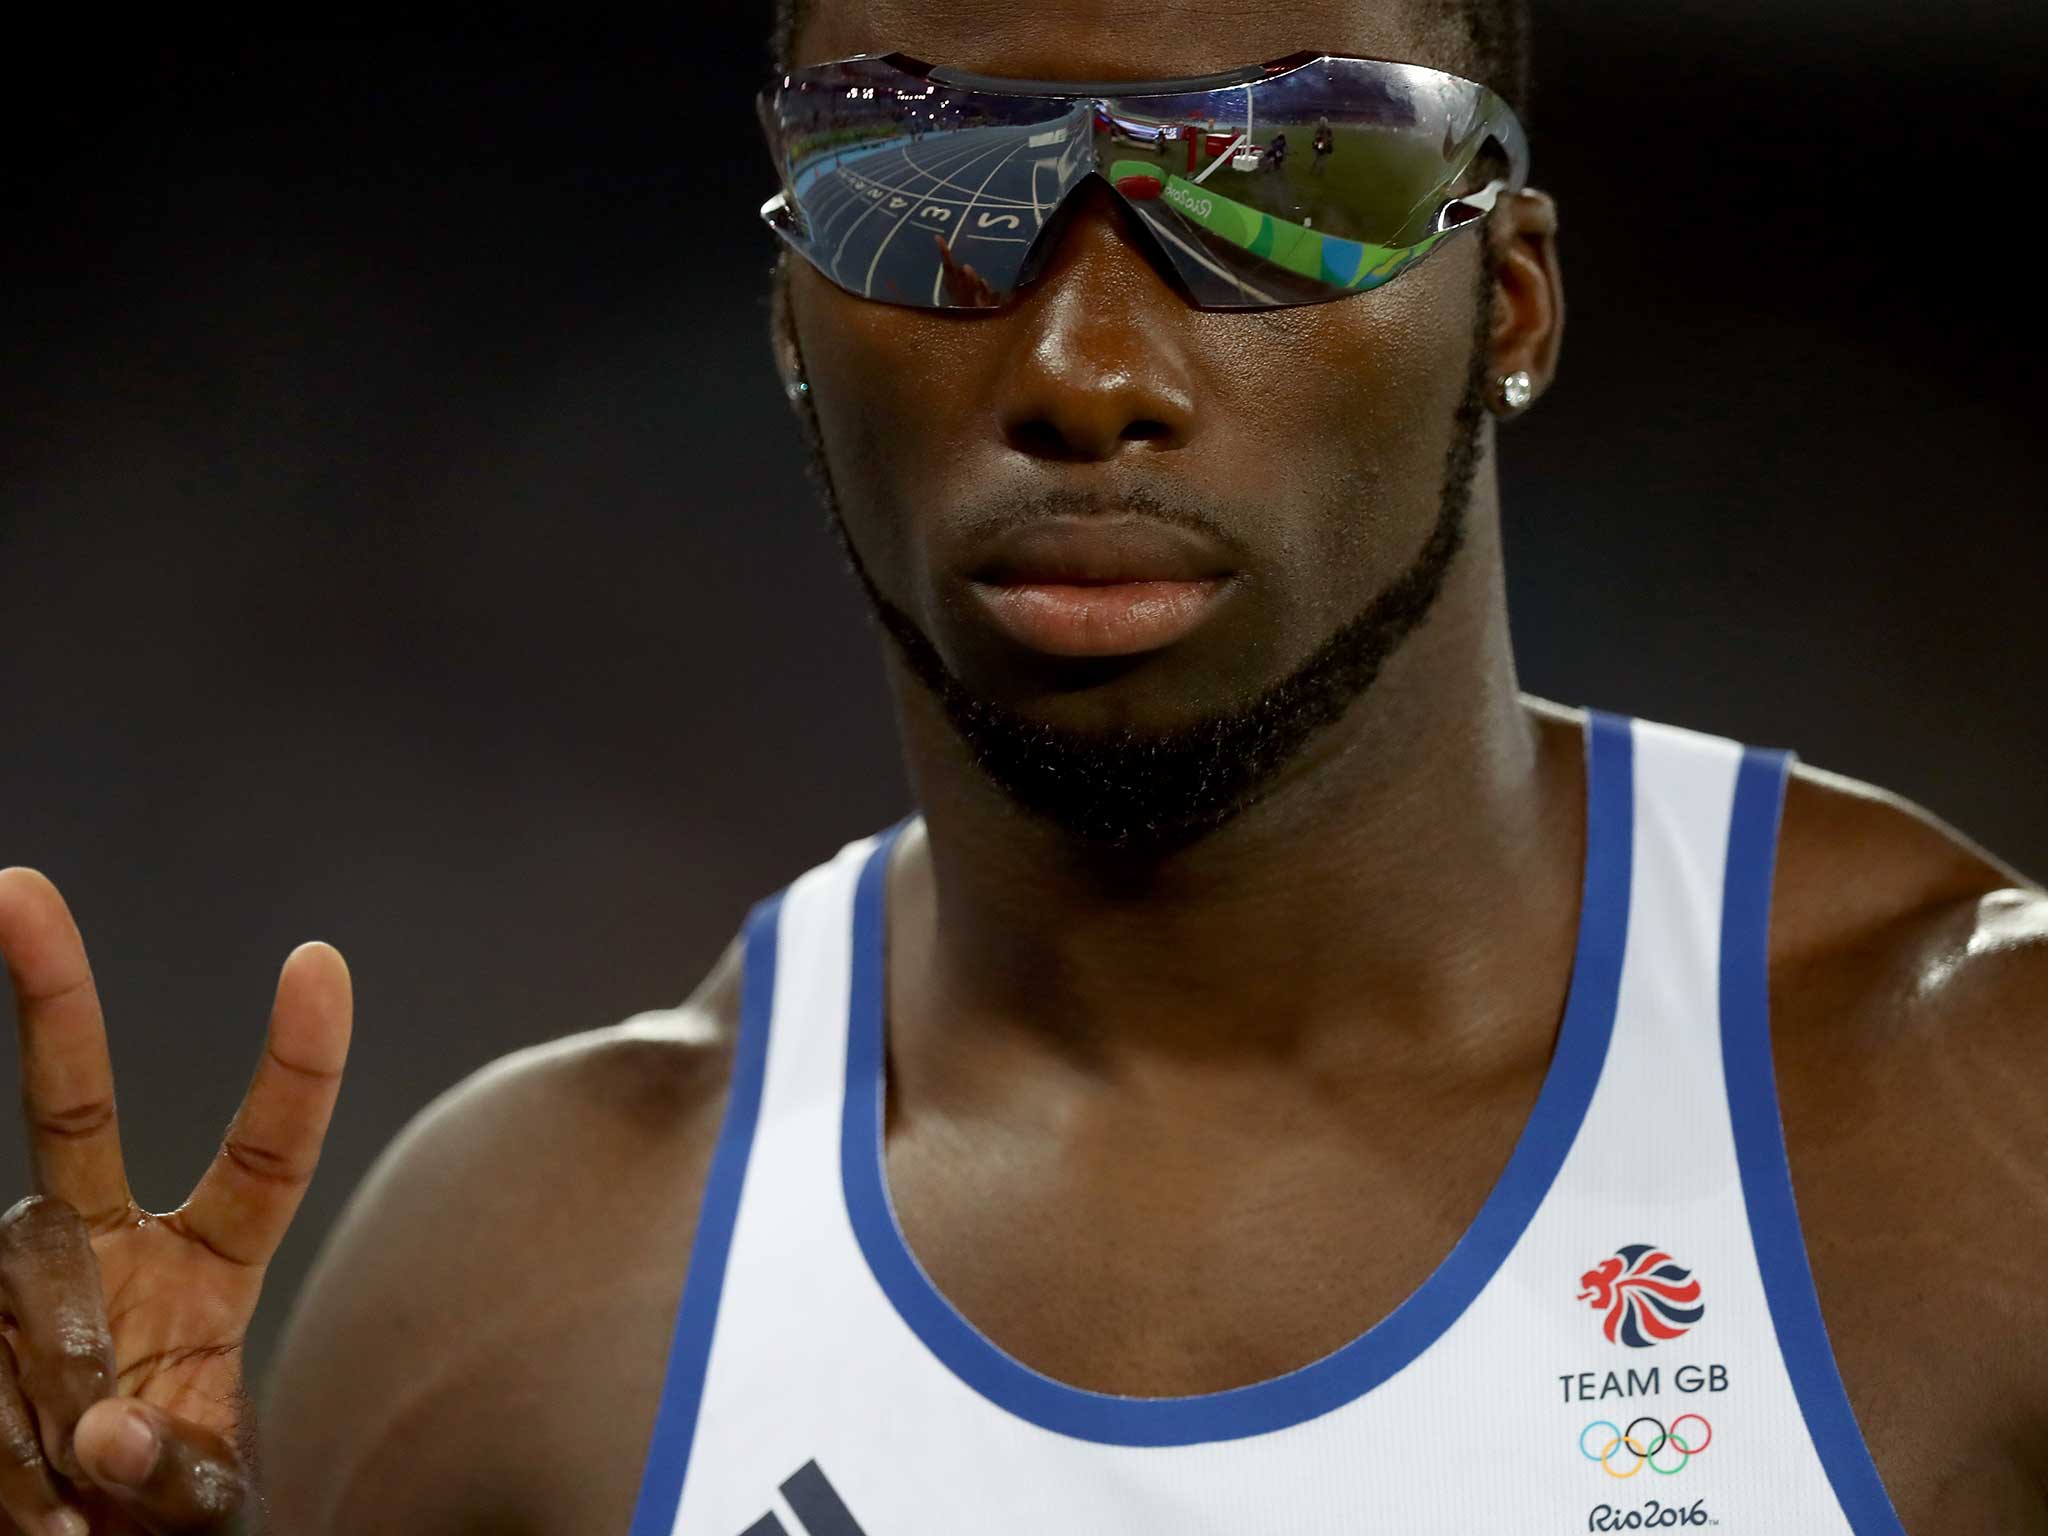 Nigel Levine has congratulated Lynsey Sharp for coming ‘third’ in race she finished 6th against Caster Semenya